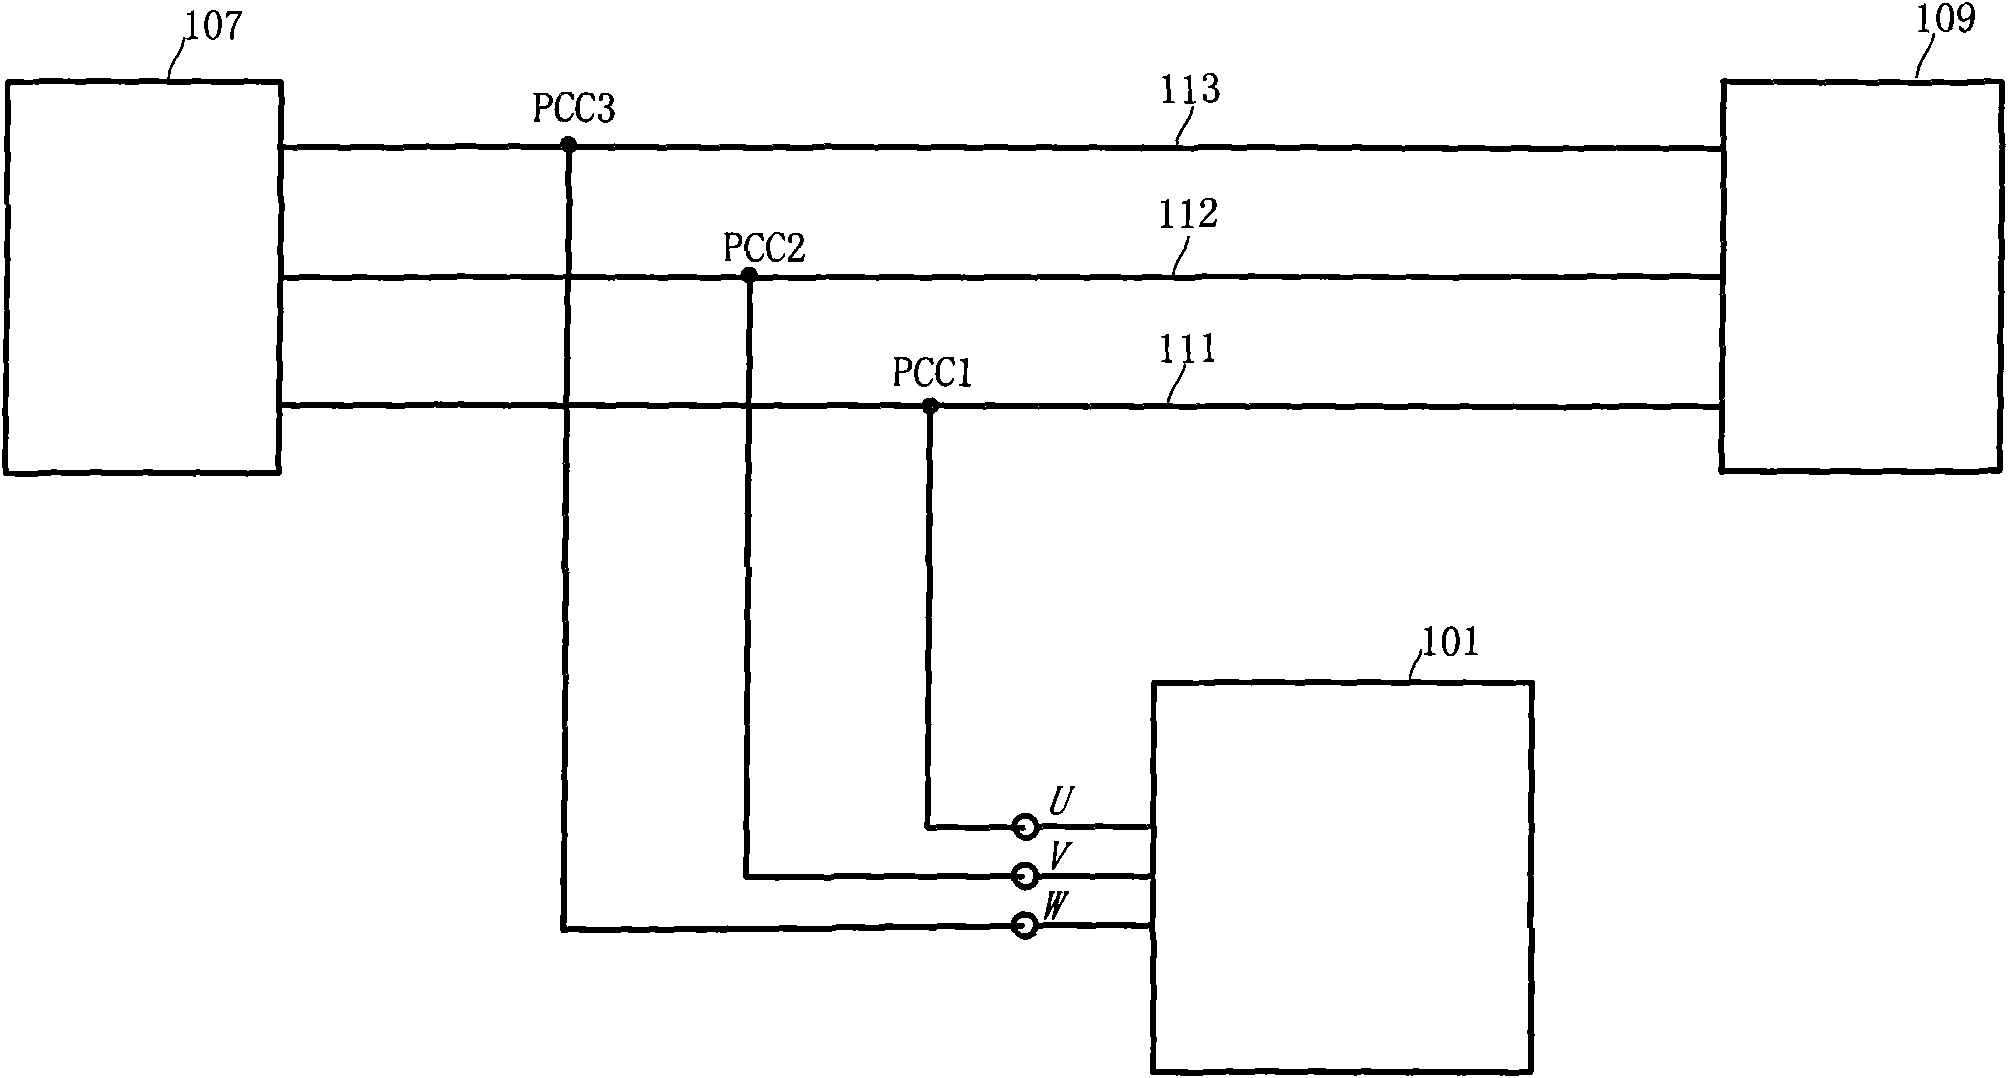 Balancing power distribution system of 10kV and below power distribution network